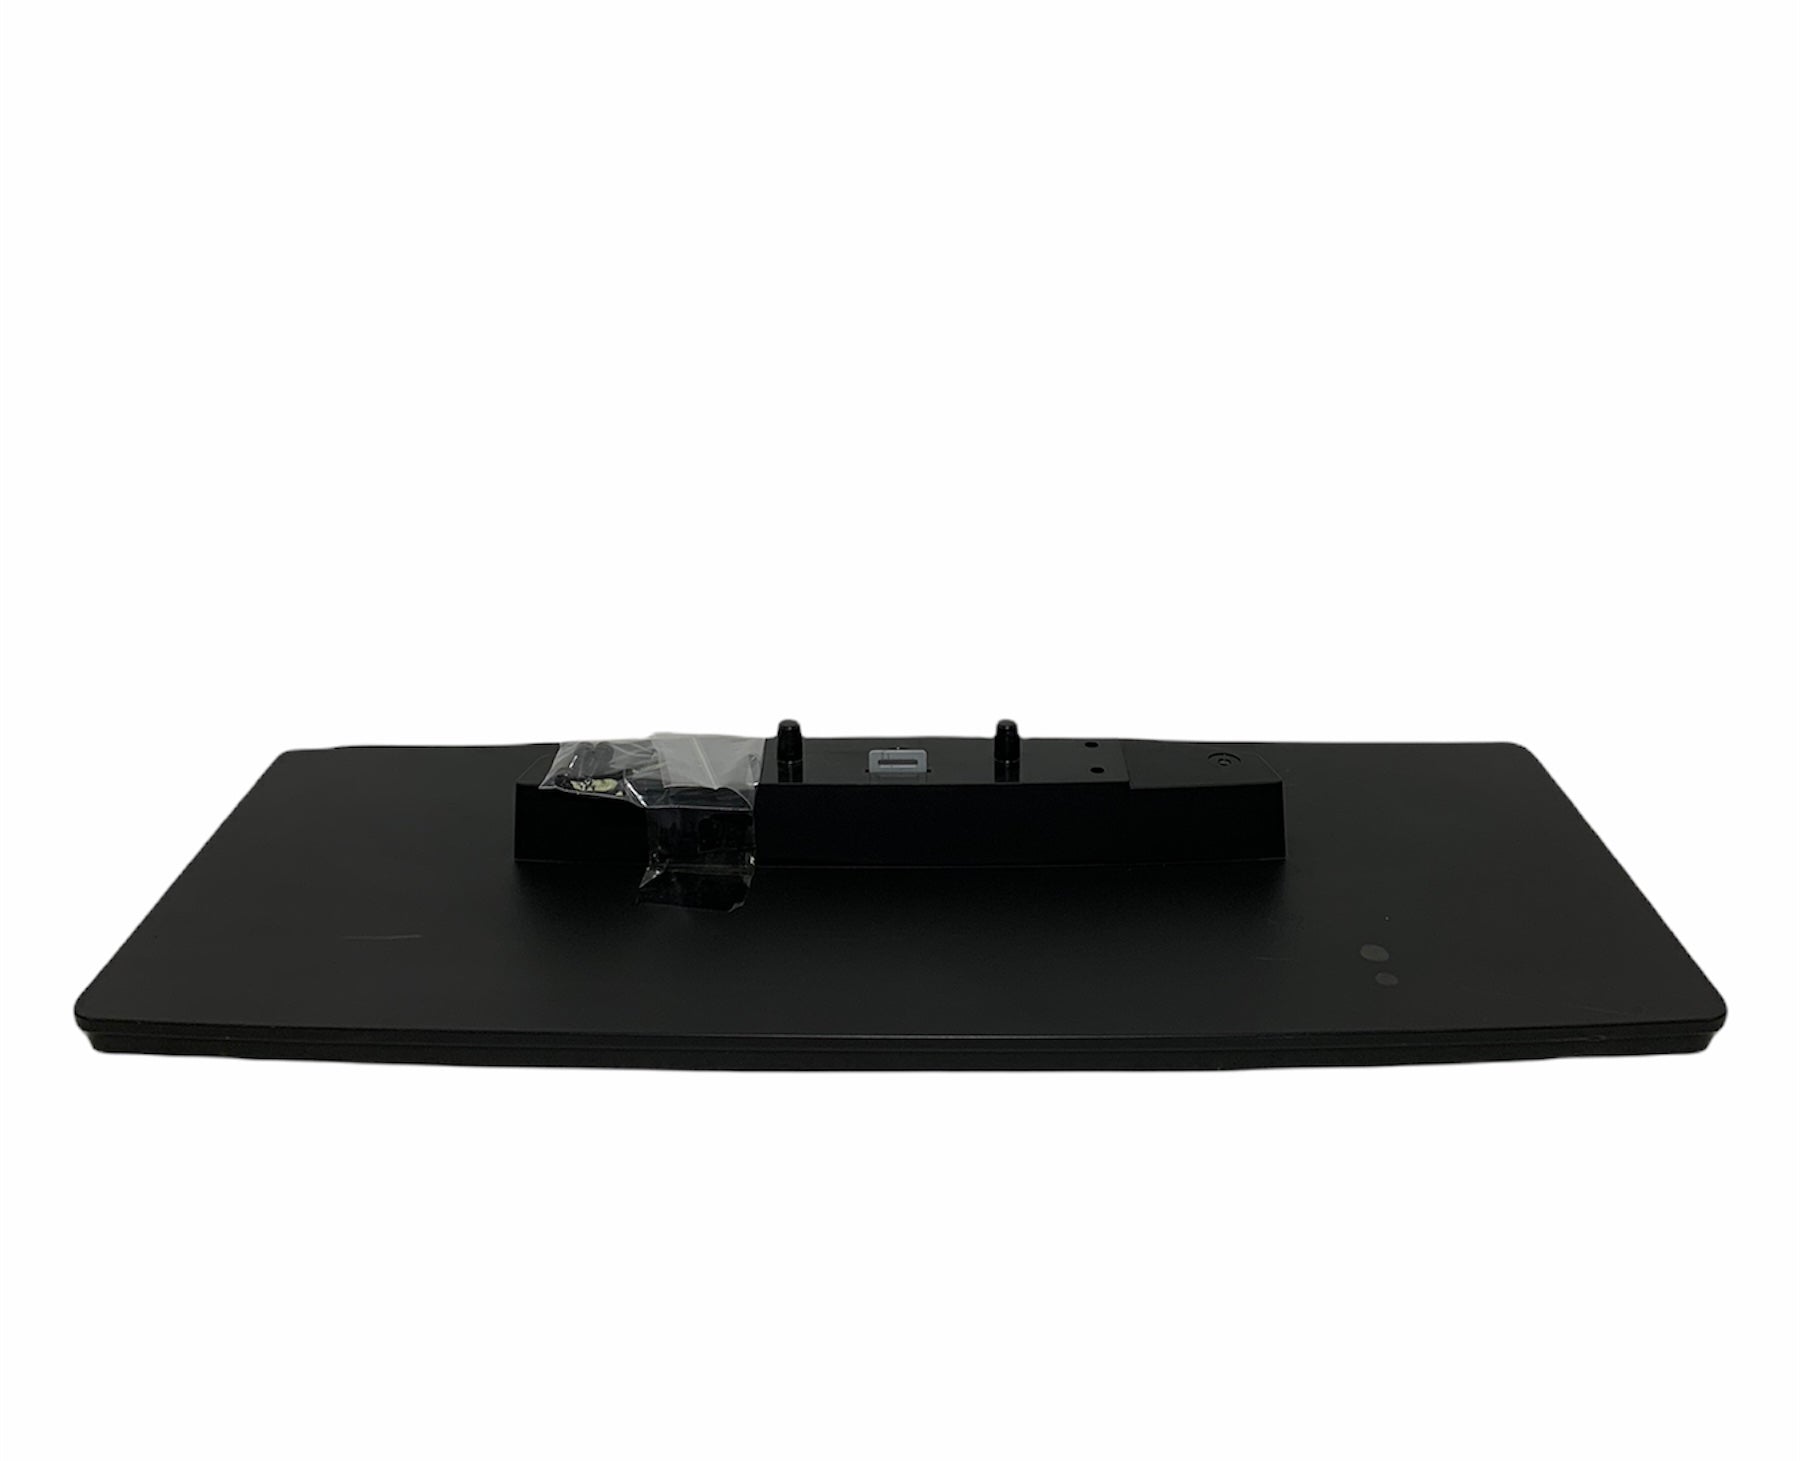 Westinghouse TX-42F450S TV Stand/Base